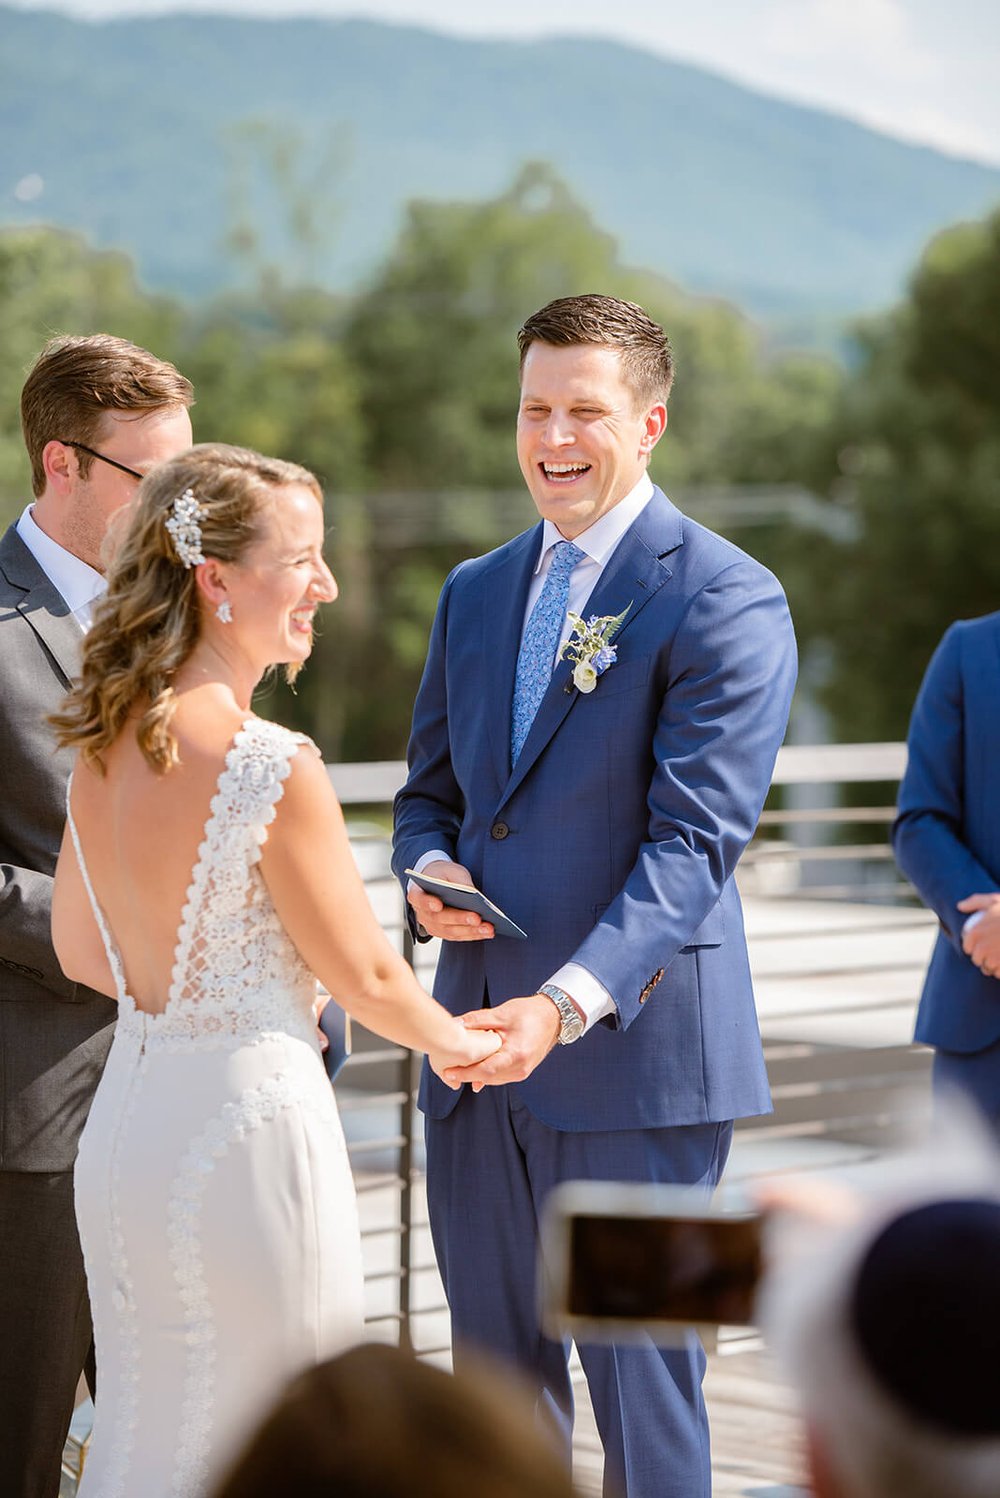 groom laughing during his wedding vows photographed by asheville wedding photographer nick levine photography